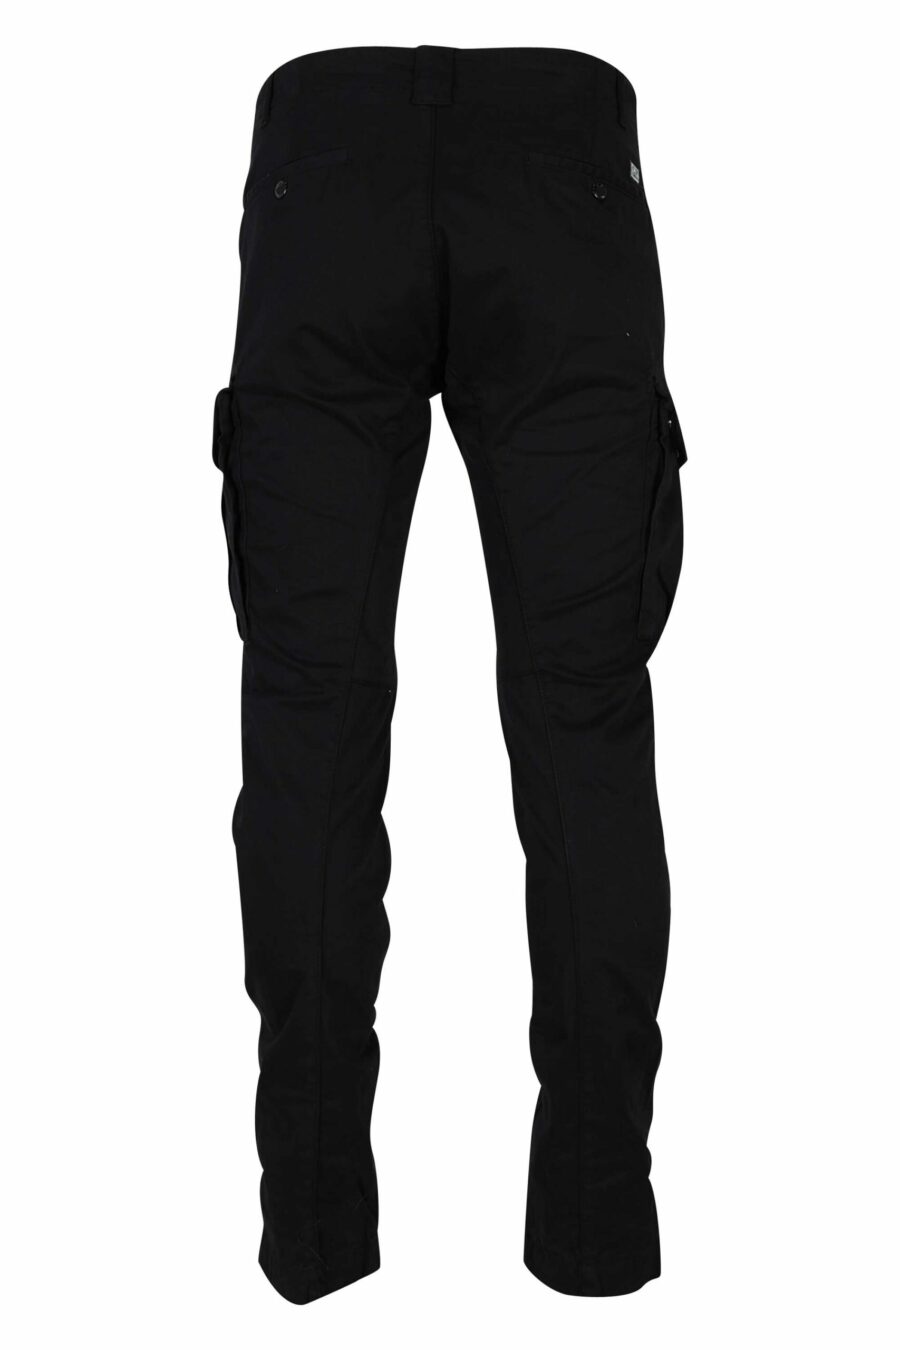 Black cargo trousers in stretch satin and logo lens - 7620943597585 2 1 scaled